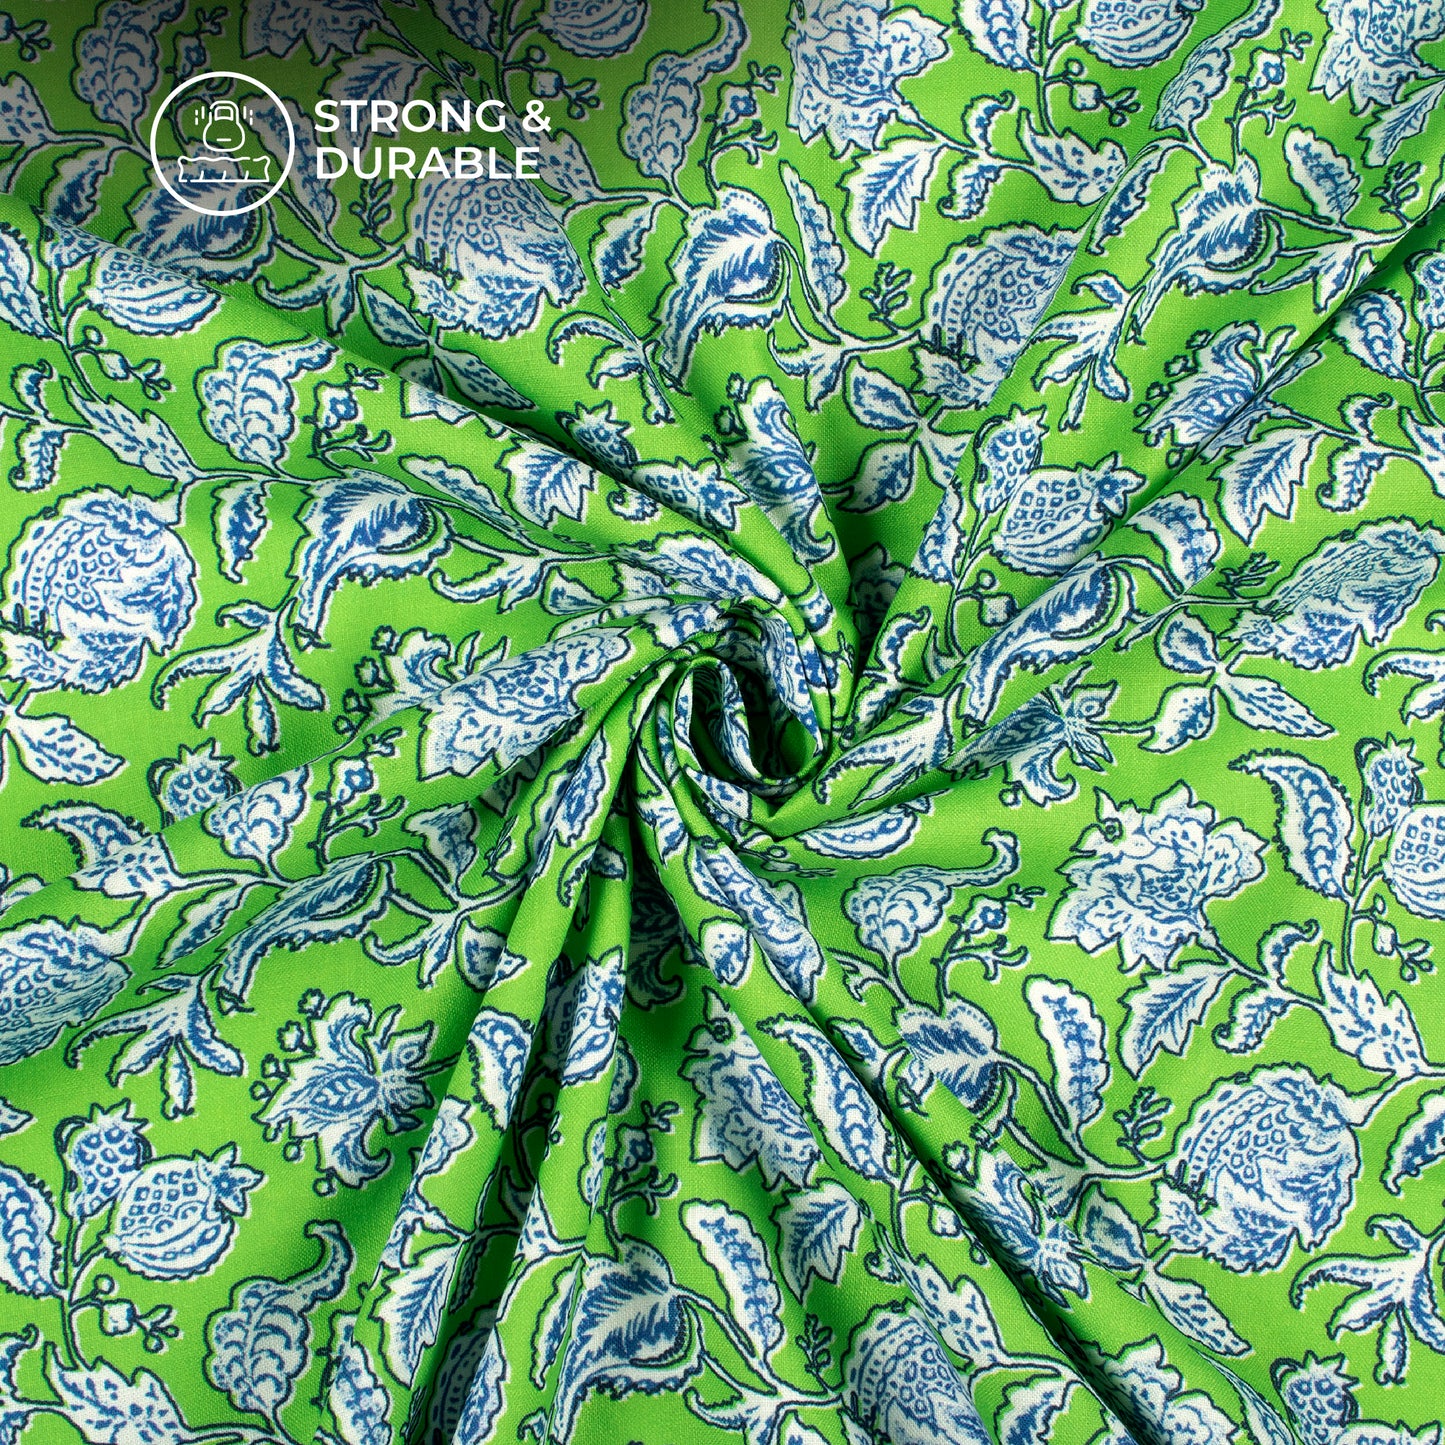 Chartreuse Green Floral Digital Print Linen Textured Fabric (Width 56 Inches)